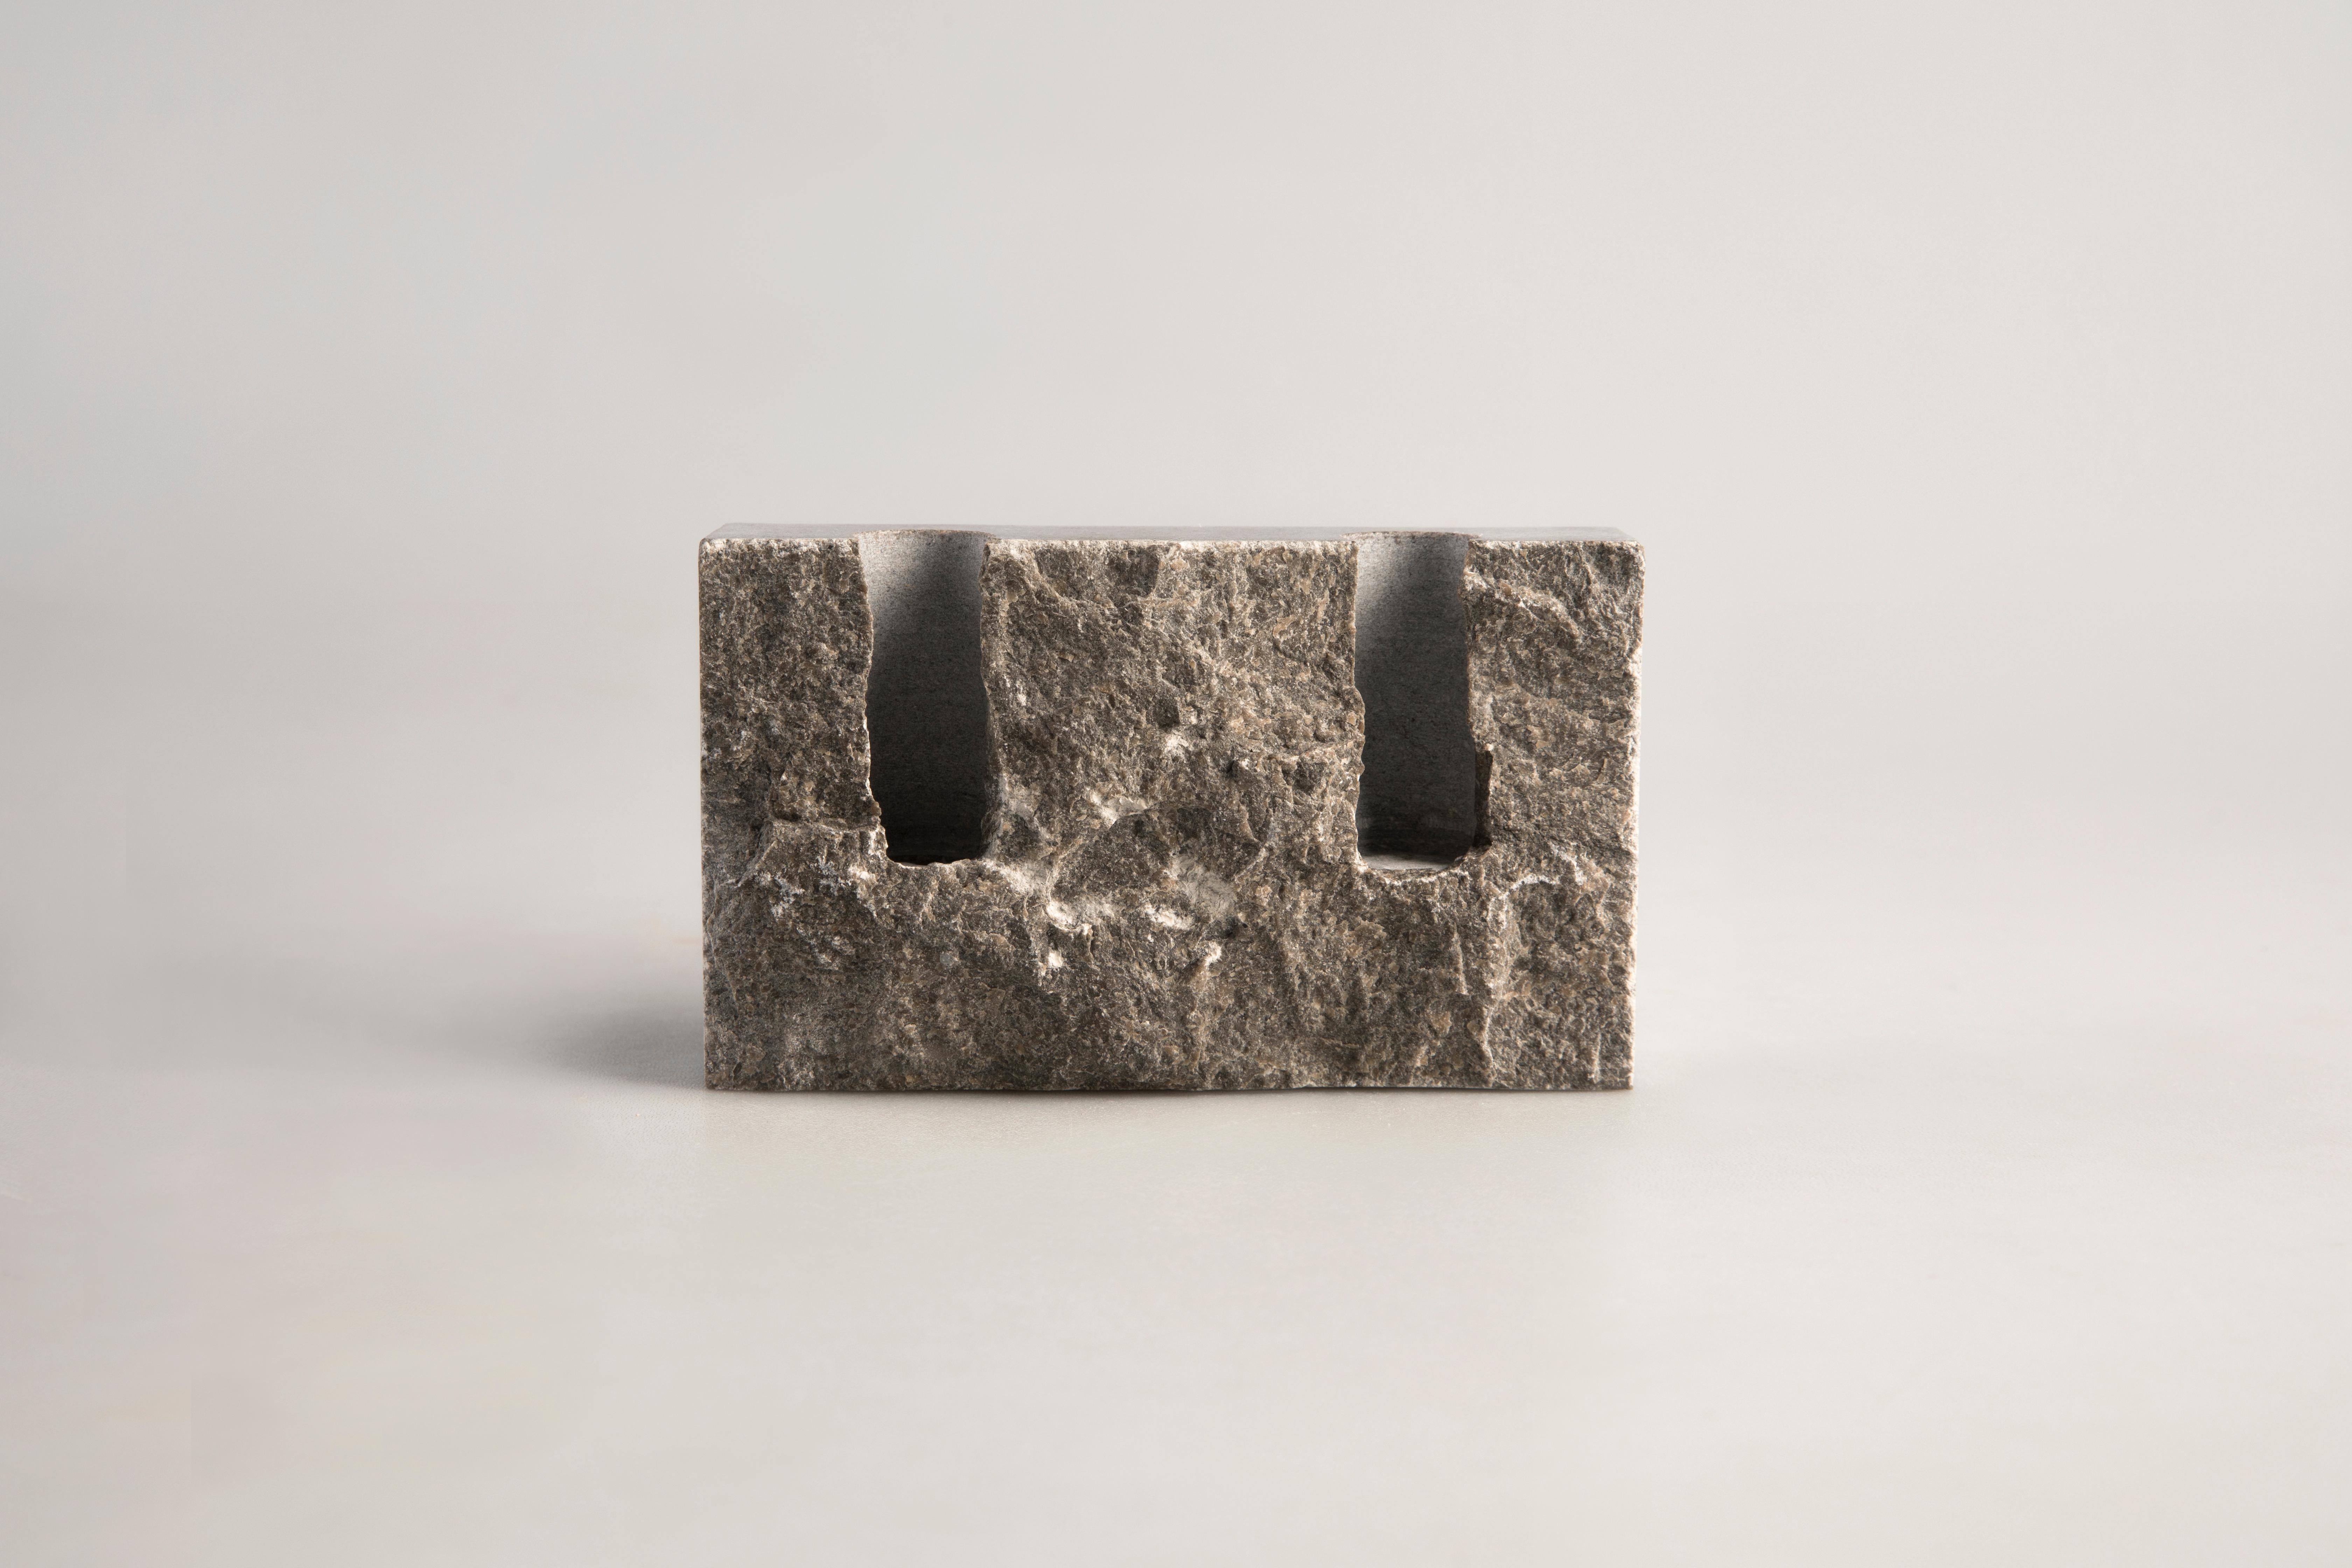 Handcrafted candle holder Sant Vicenç natural stone with rock face front (hand chipped) and smooth sides. Please note that each stone is unique and reacts differently, therefore important variations in colour, shape and texture occur. 

Snug